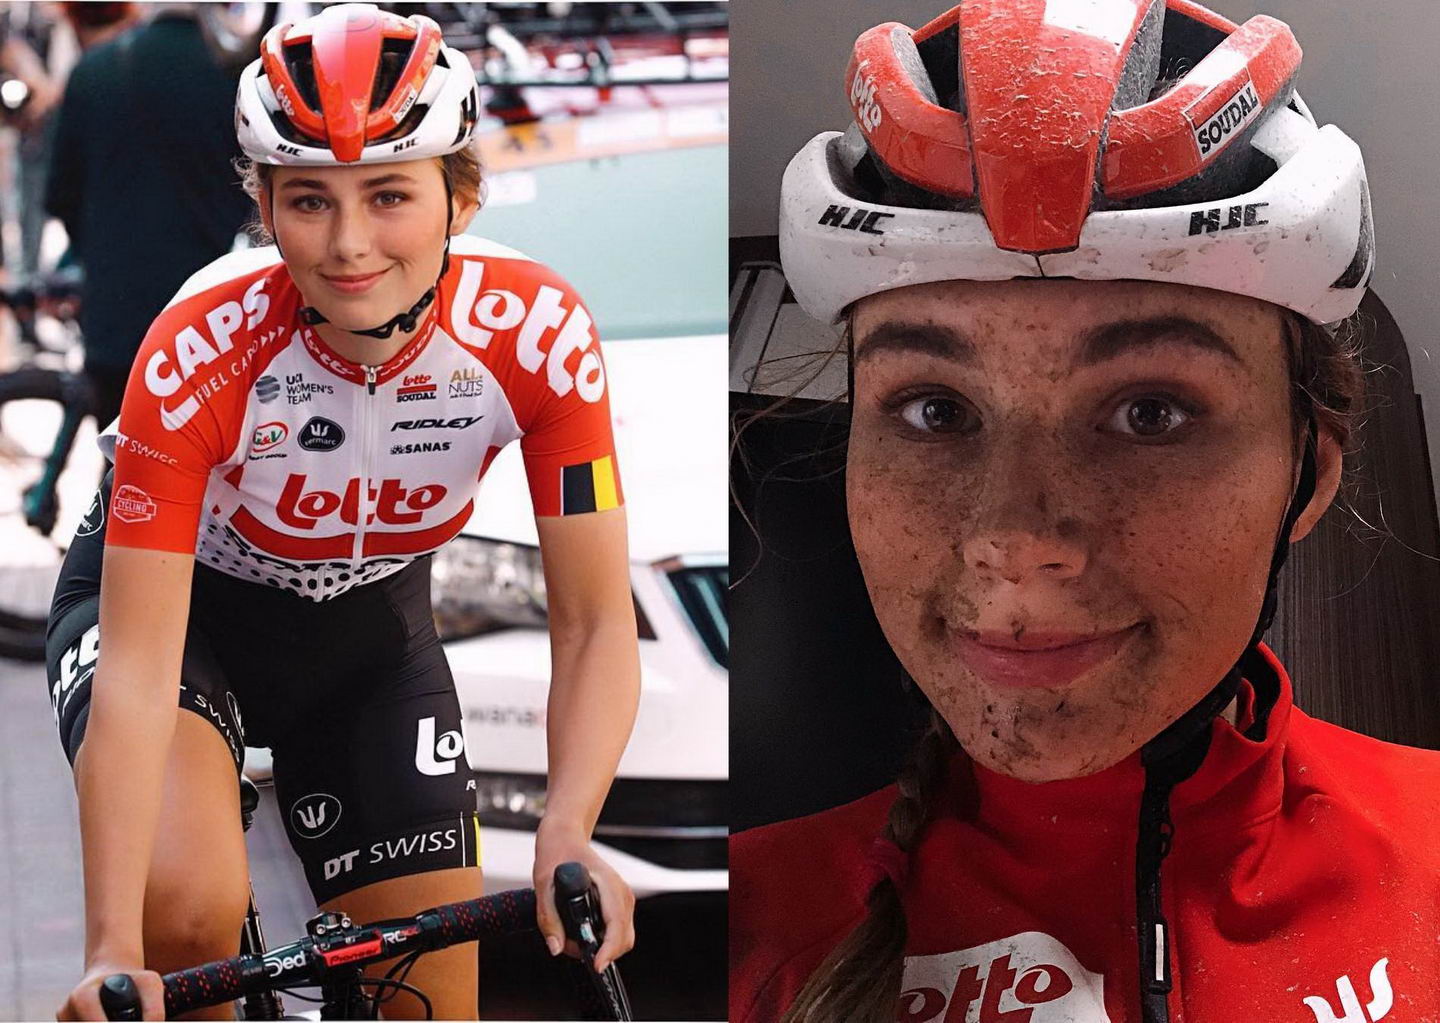 biking before and after - Soudal Caps Women'S Fuel Can Tem Soudal Ridley Ut Swicc Us amare Sanas loro Lastno Dt Swiss